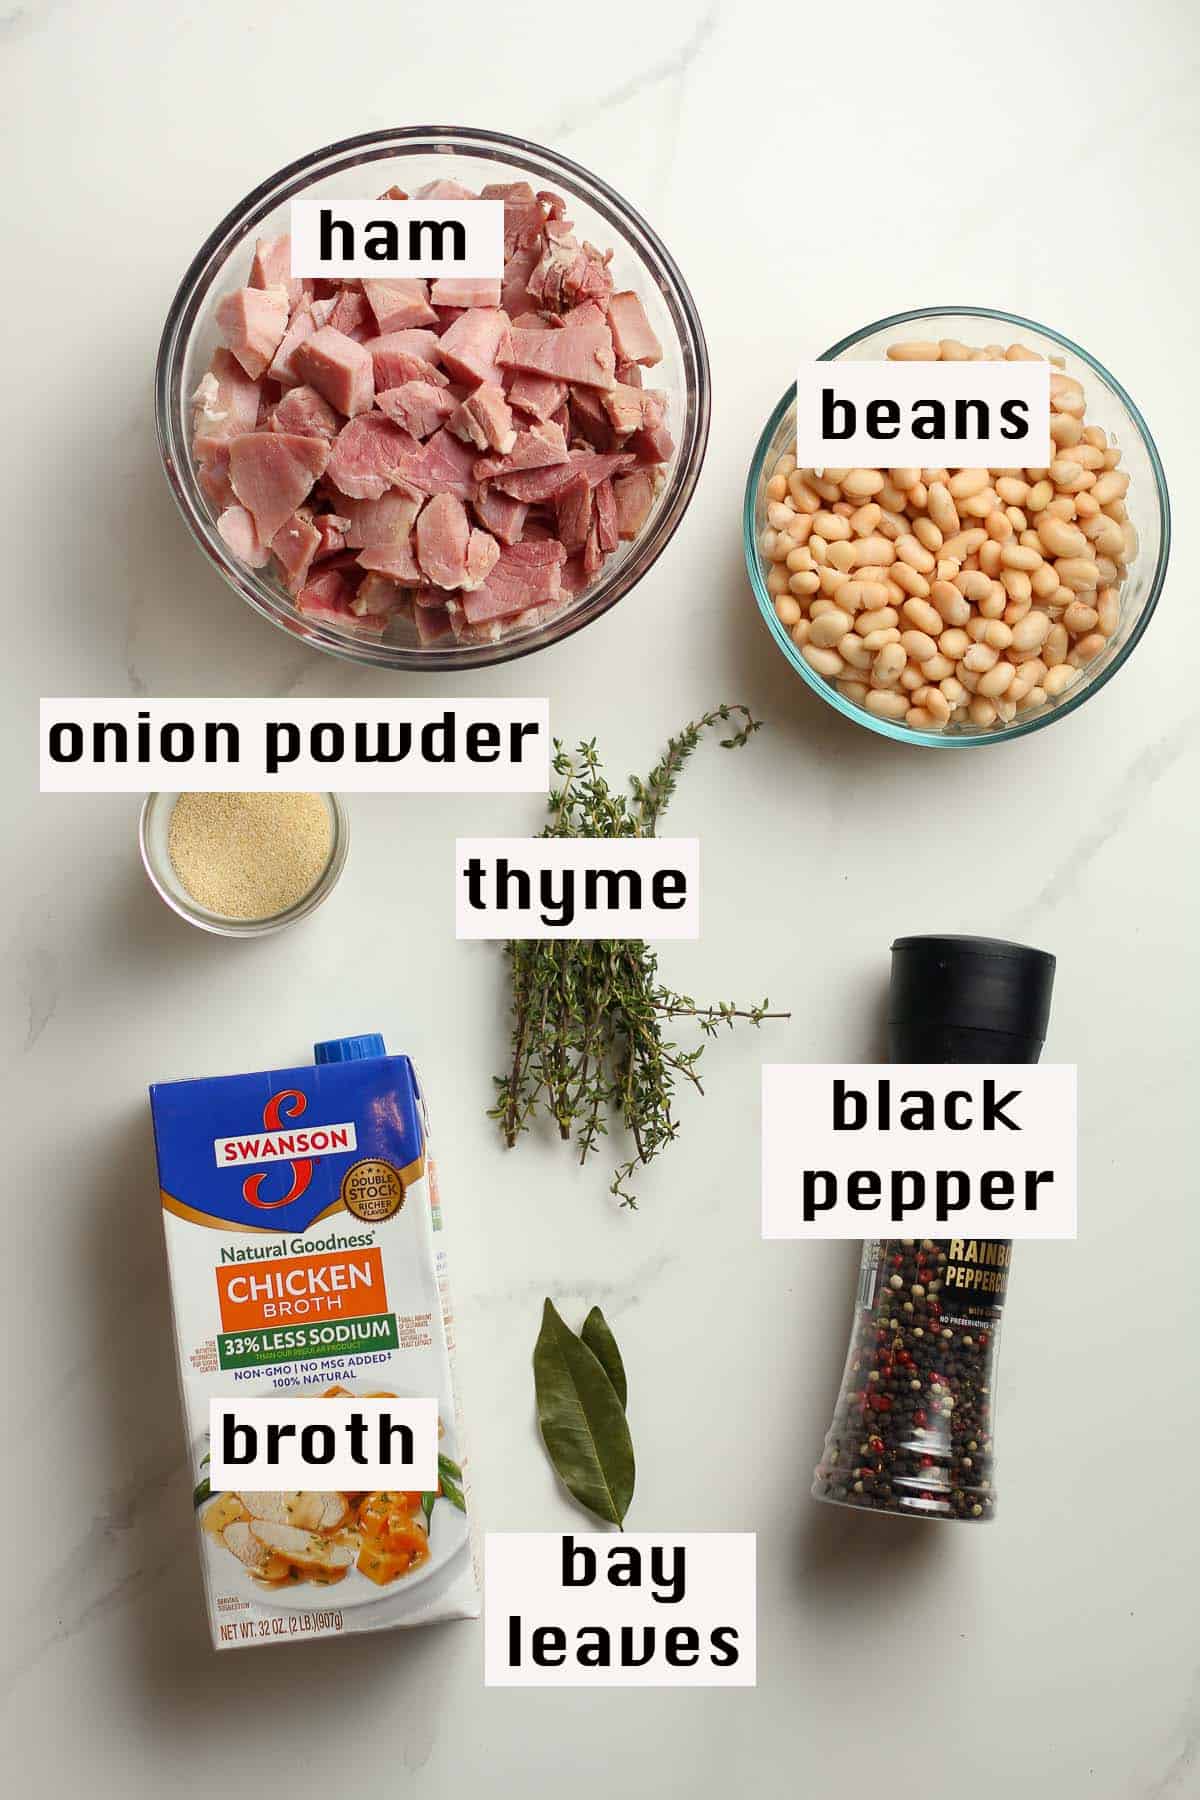 The soup ingredients.